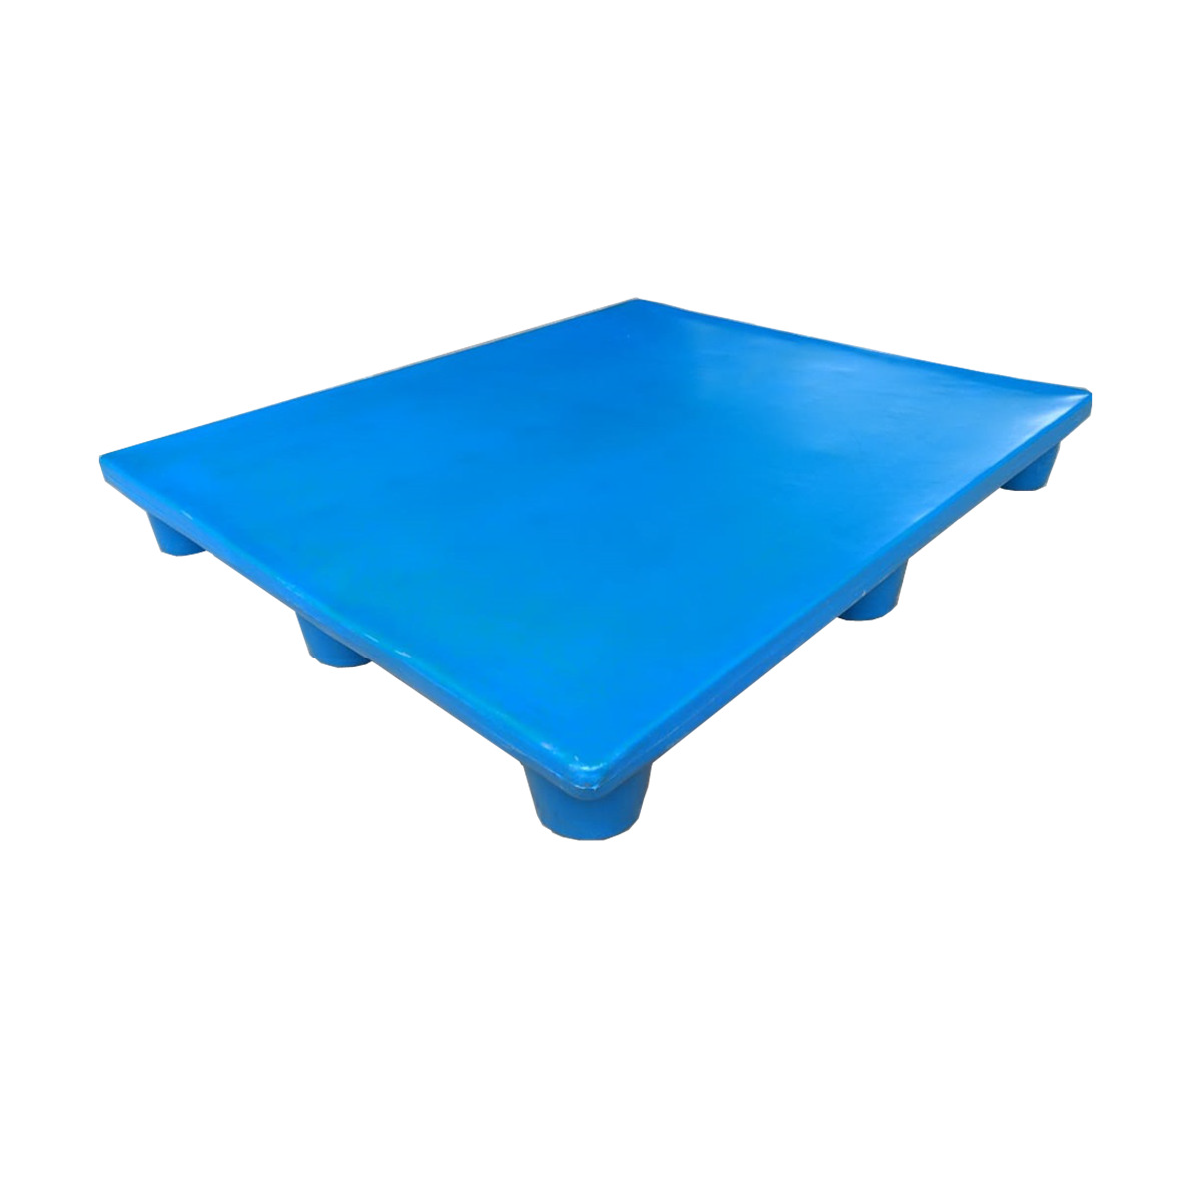 Swift TechnoPlast Roto Moulded Eco Plastic Pallet 4 Way Non-Reversible Plain Top 1200 x 1200 x 160mm (Pack of 5)